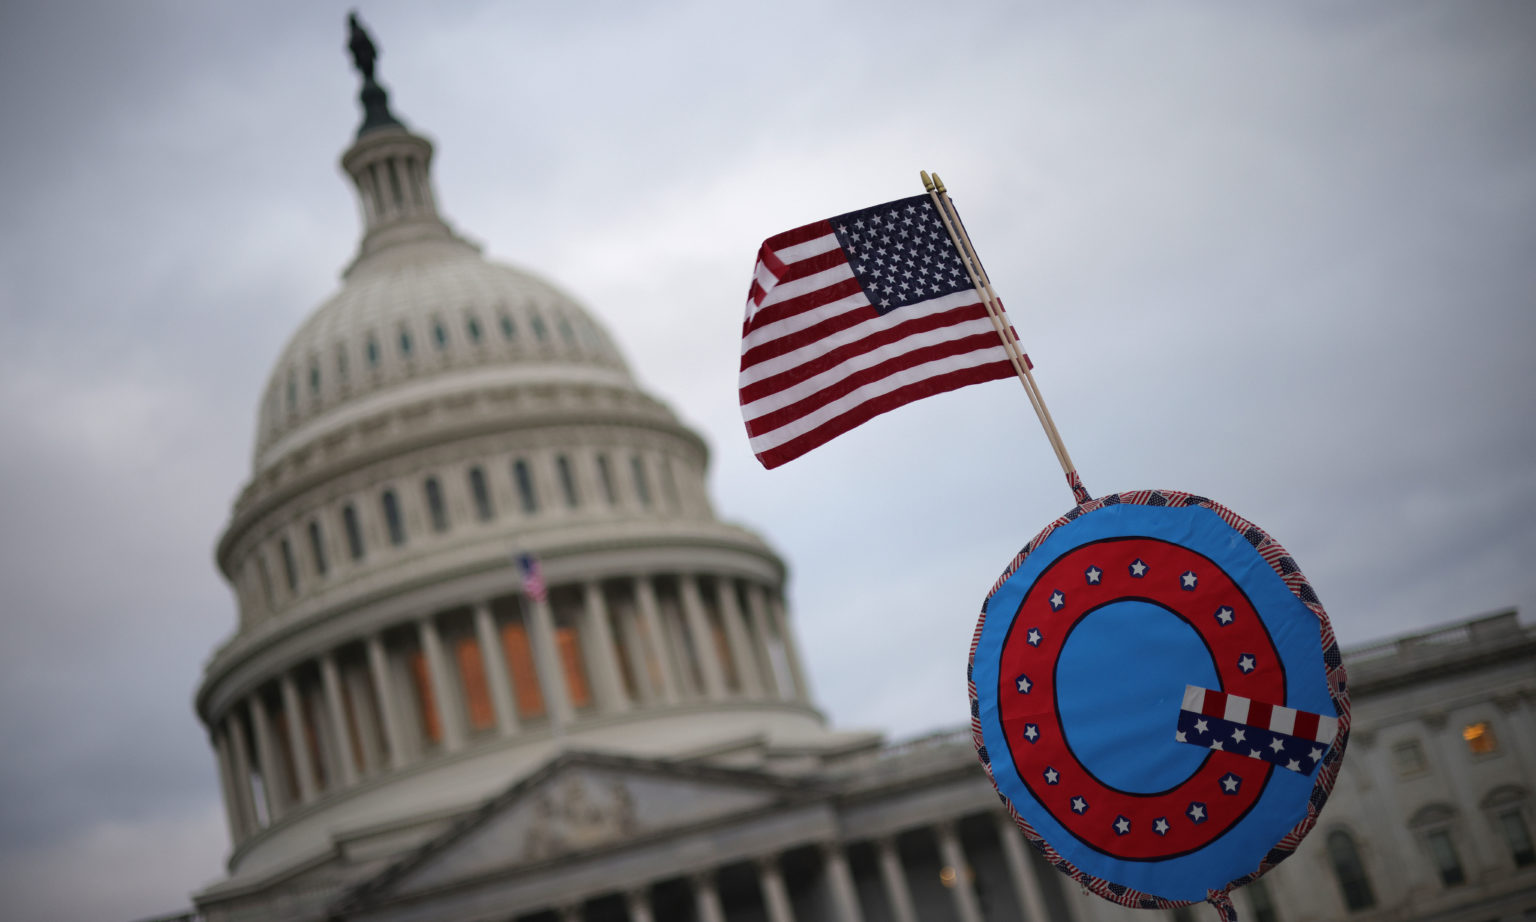 Circle sign with a Q and American flag on top with the US Capitol dome in the background.